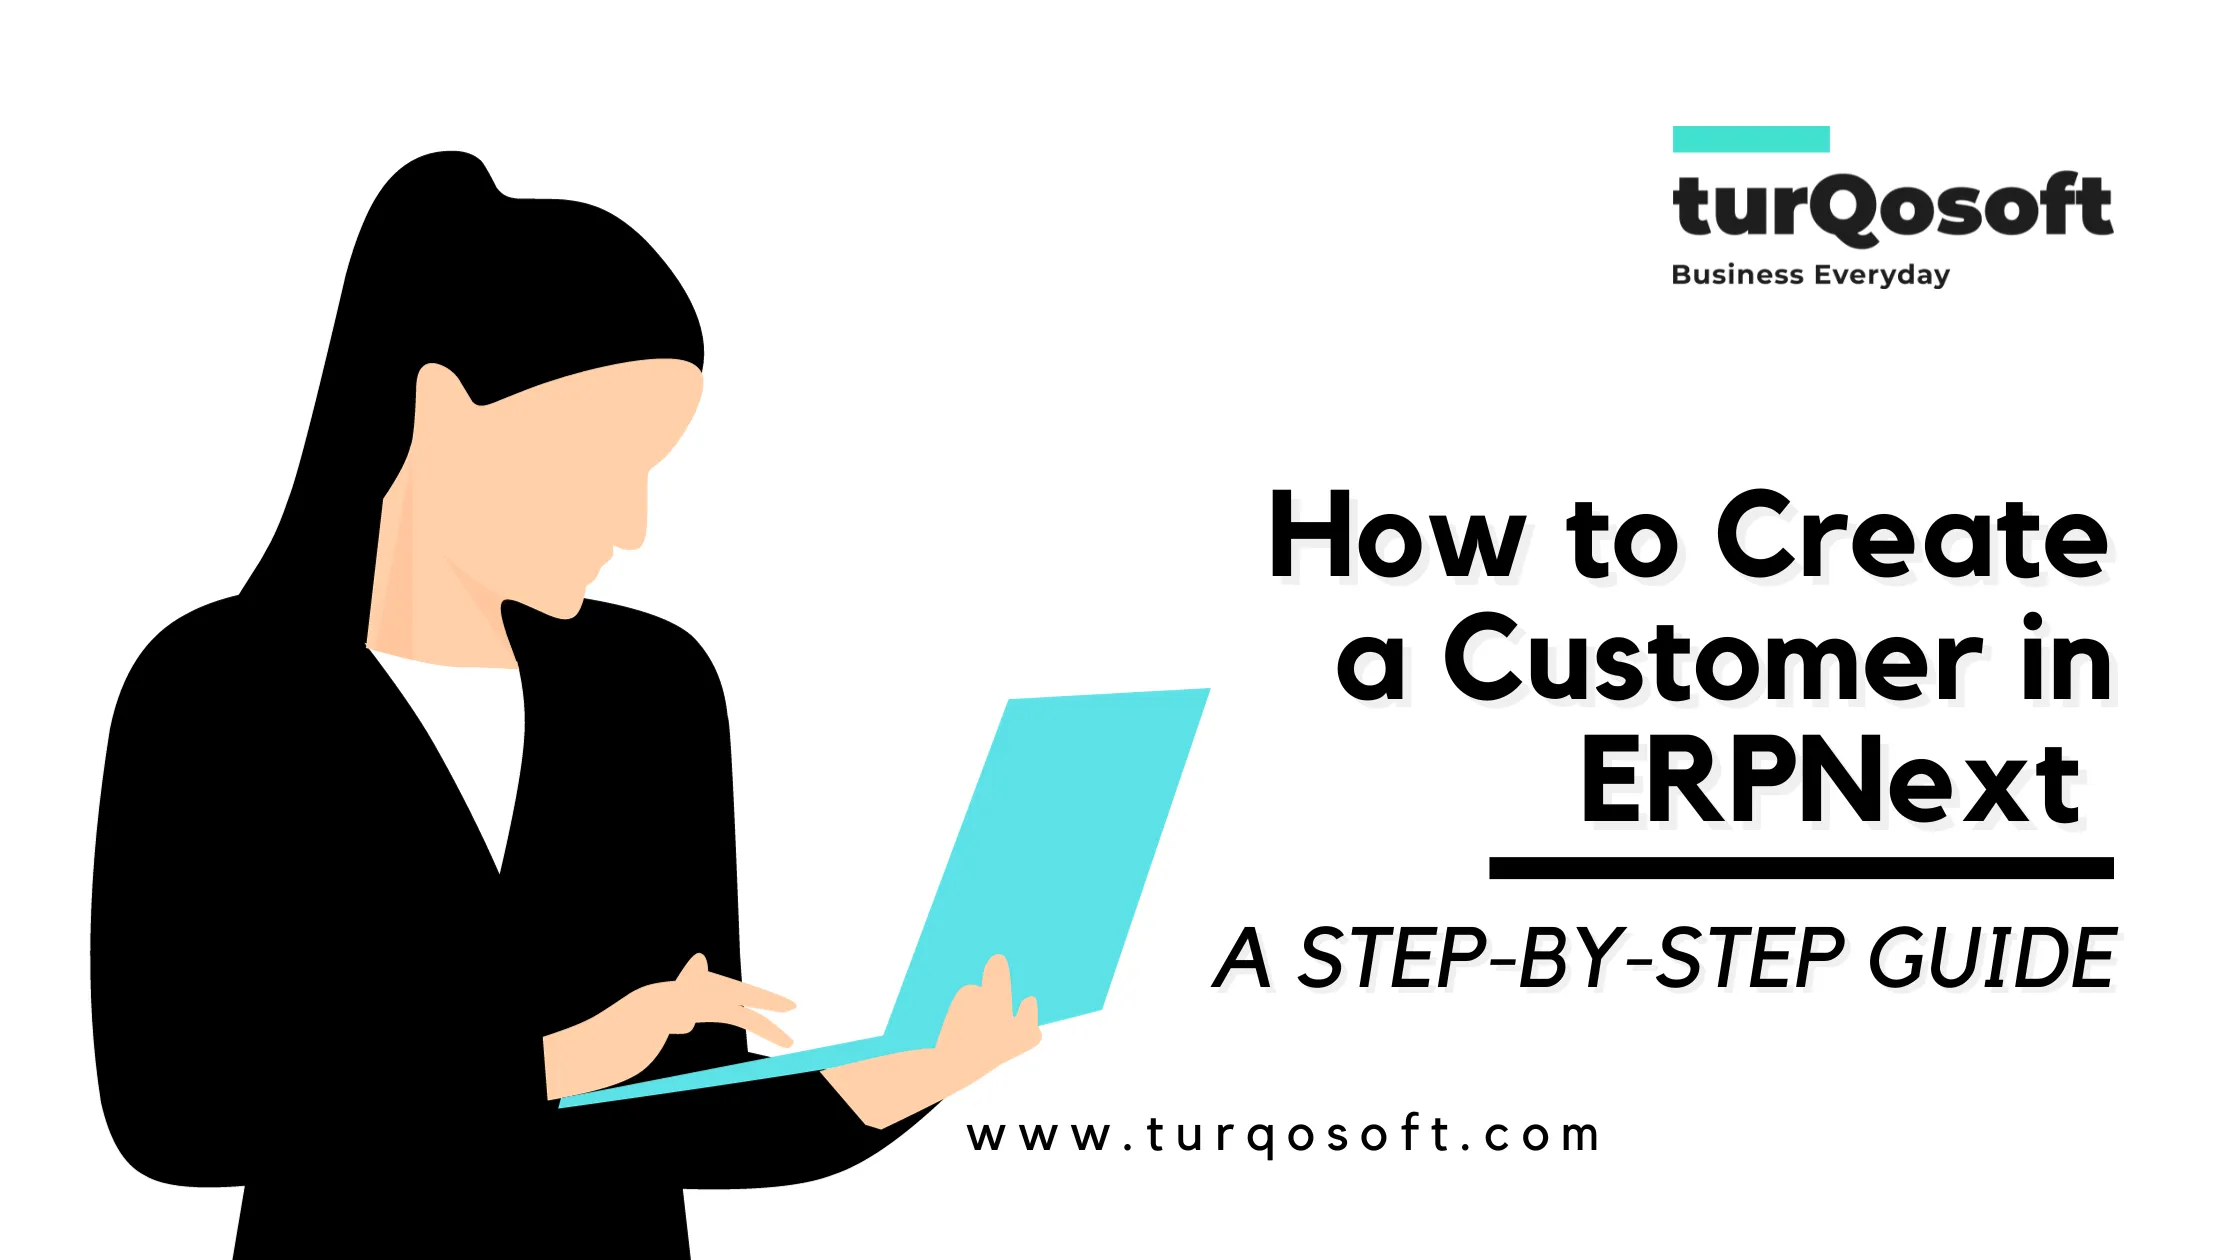 How to Create a Customer in ERPNext: A Step-by-Step Guide